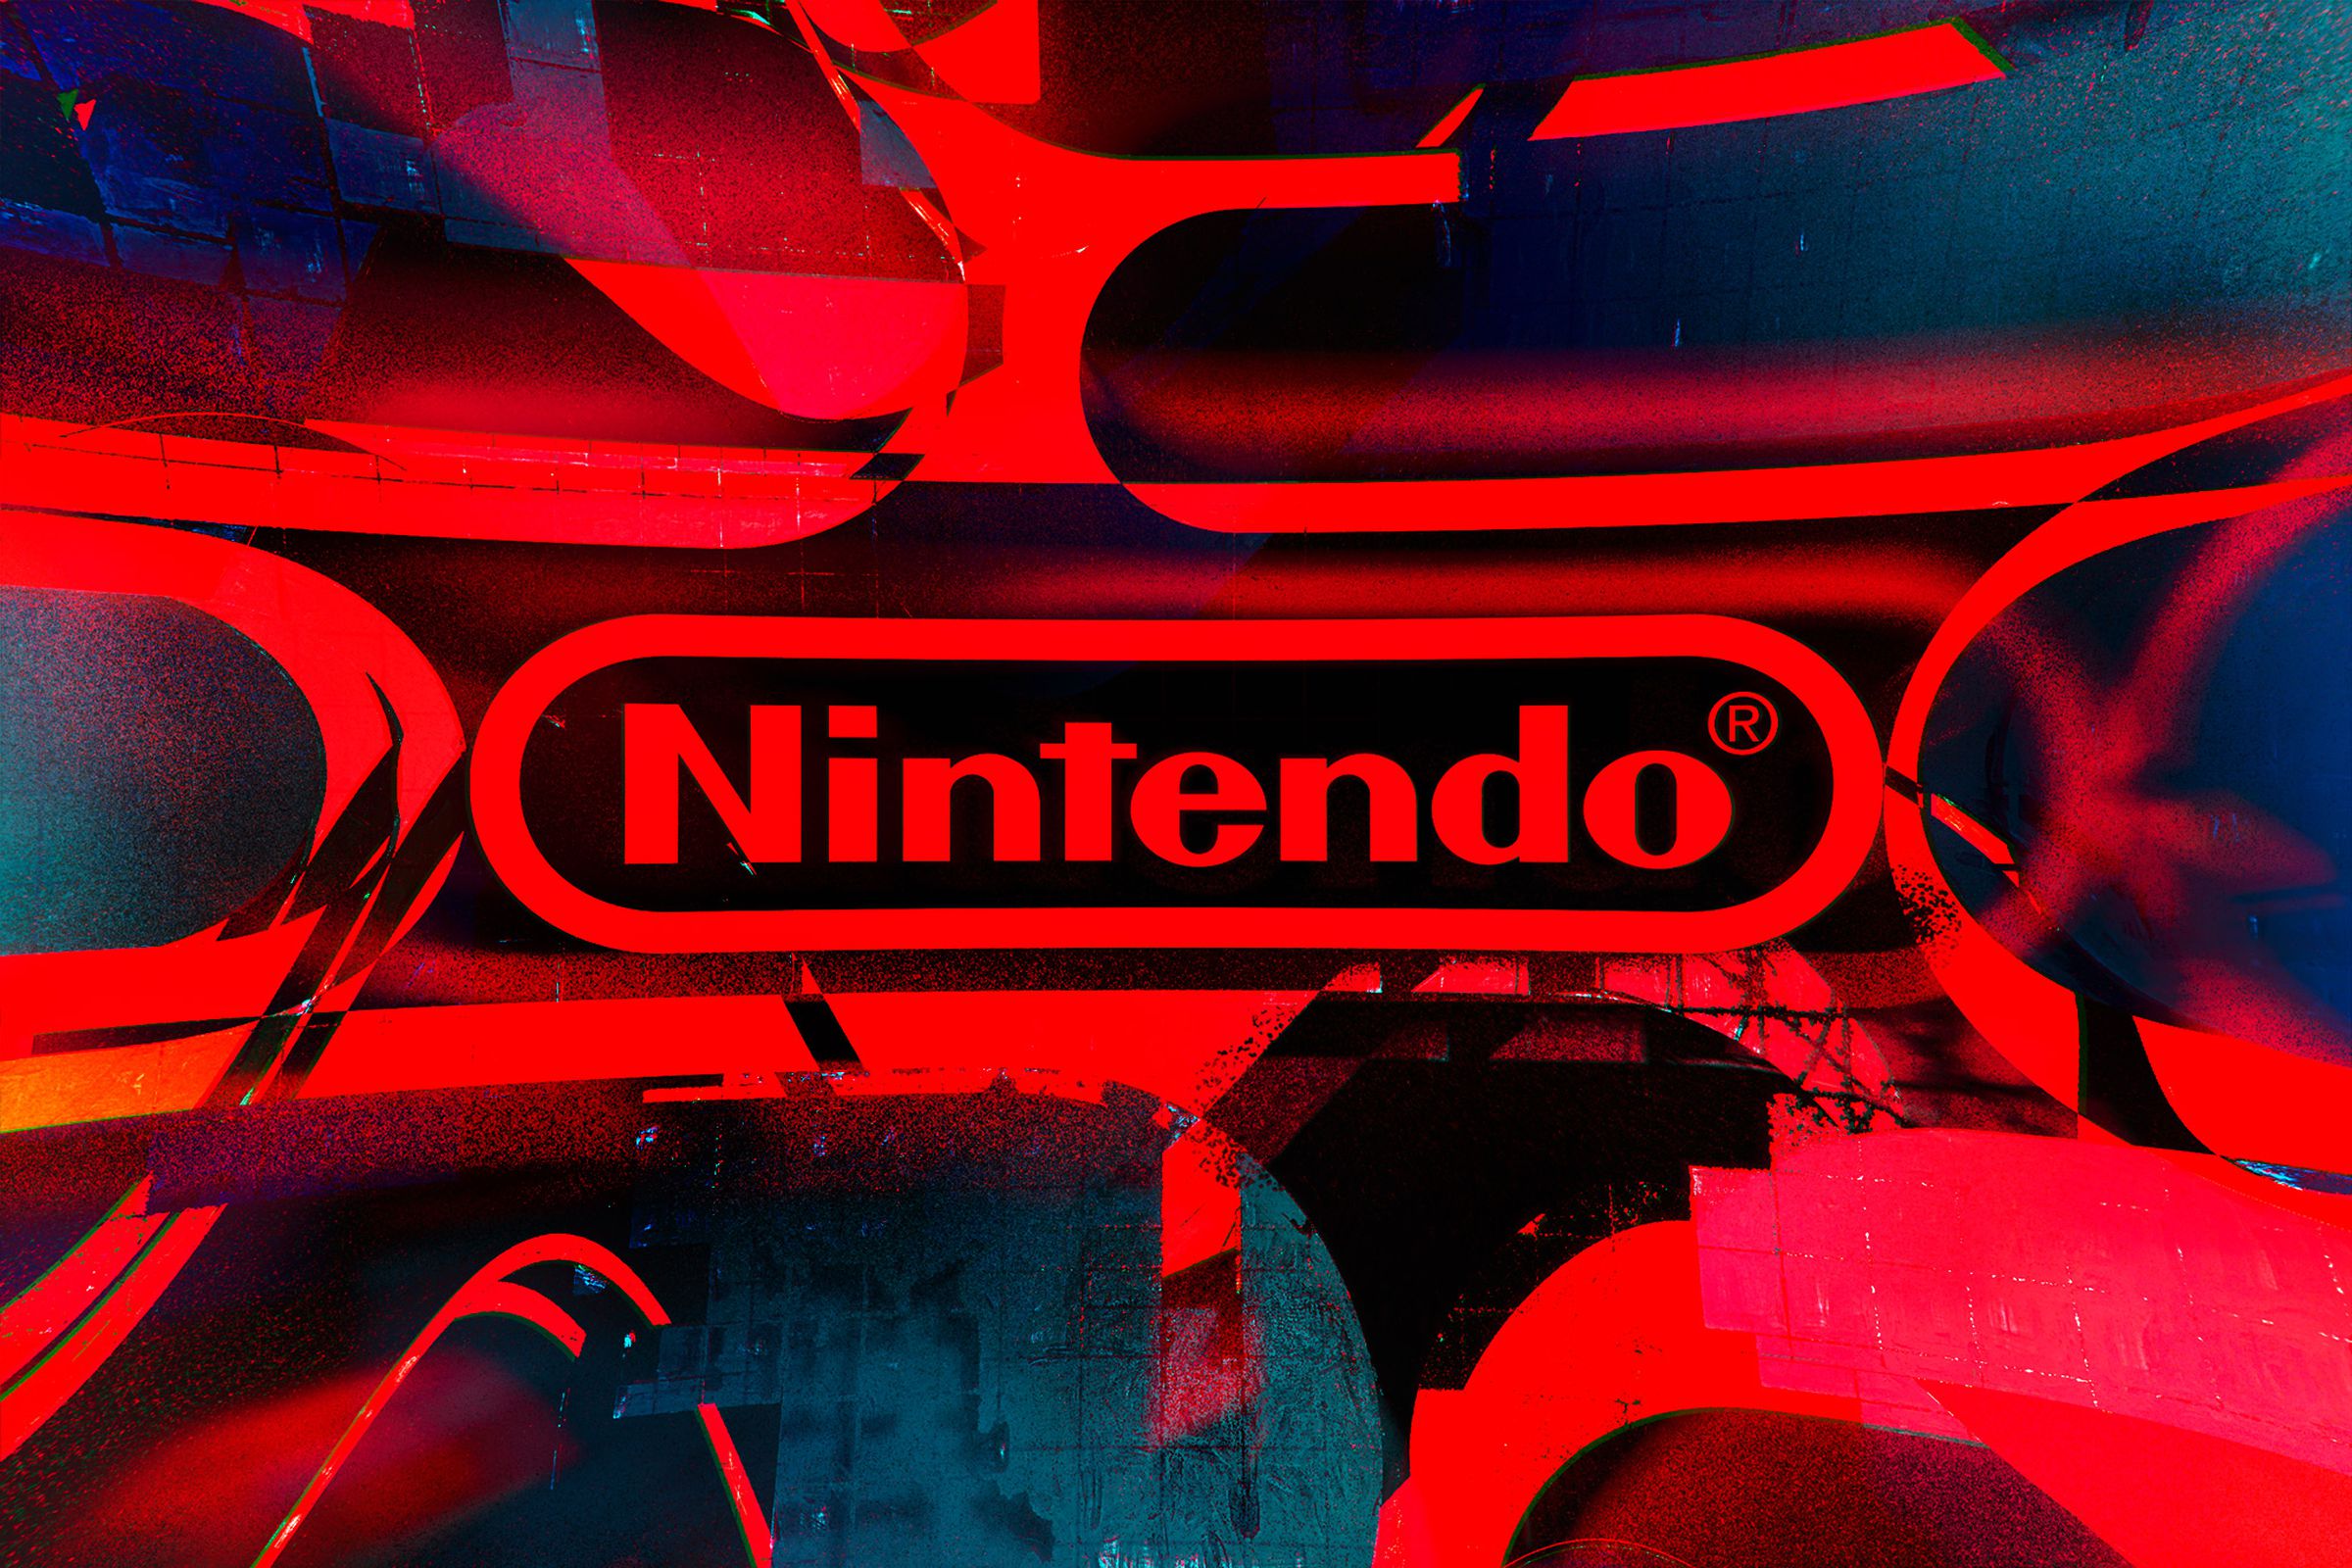 The Nintendo logo in black and red